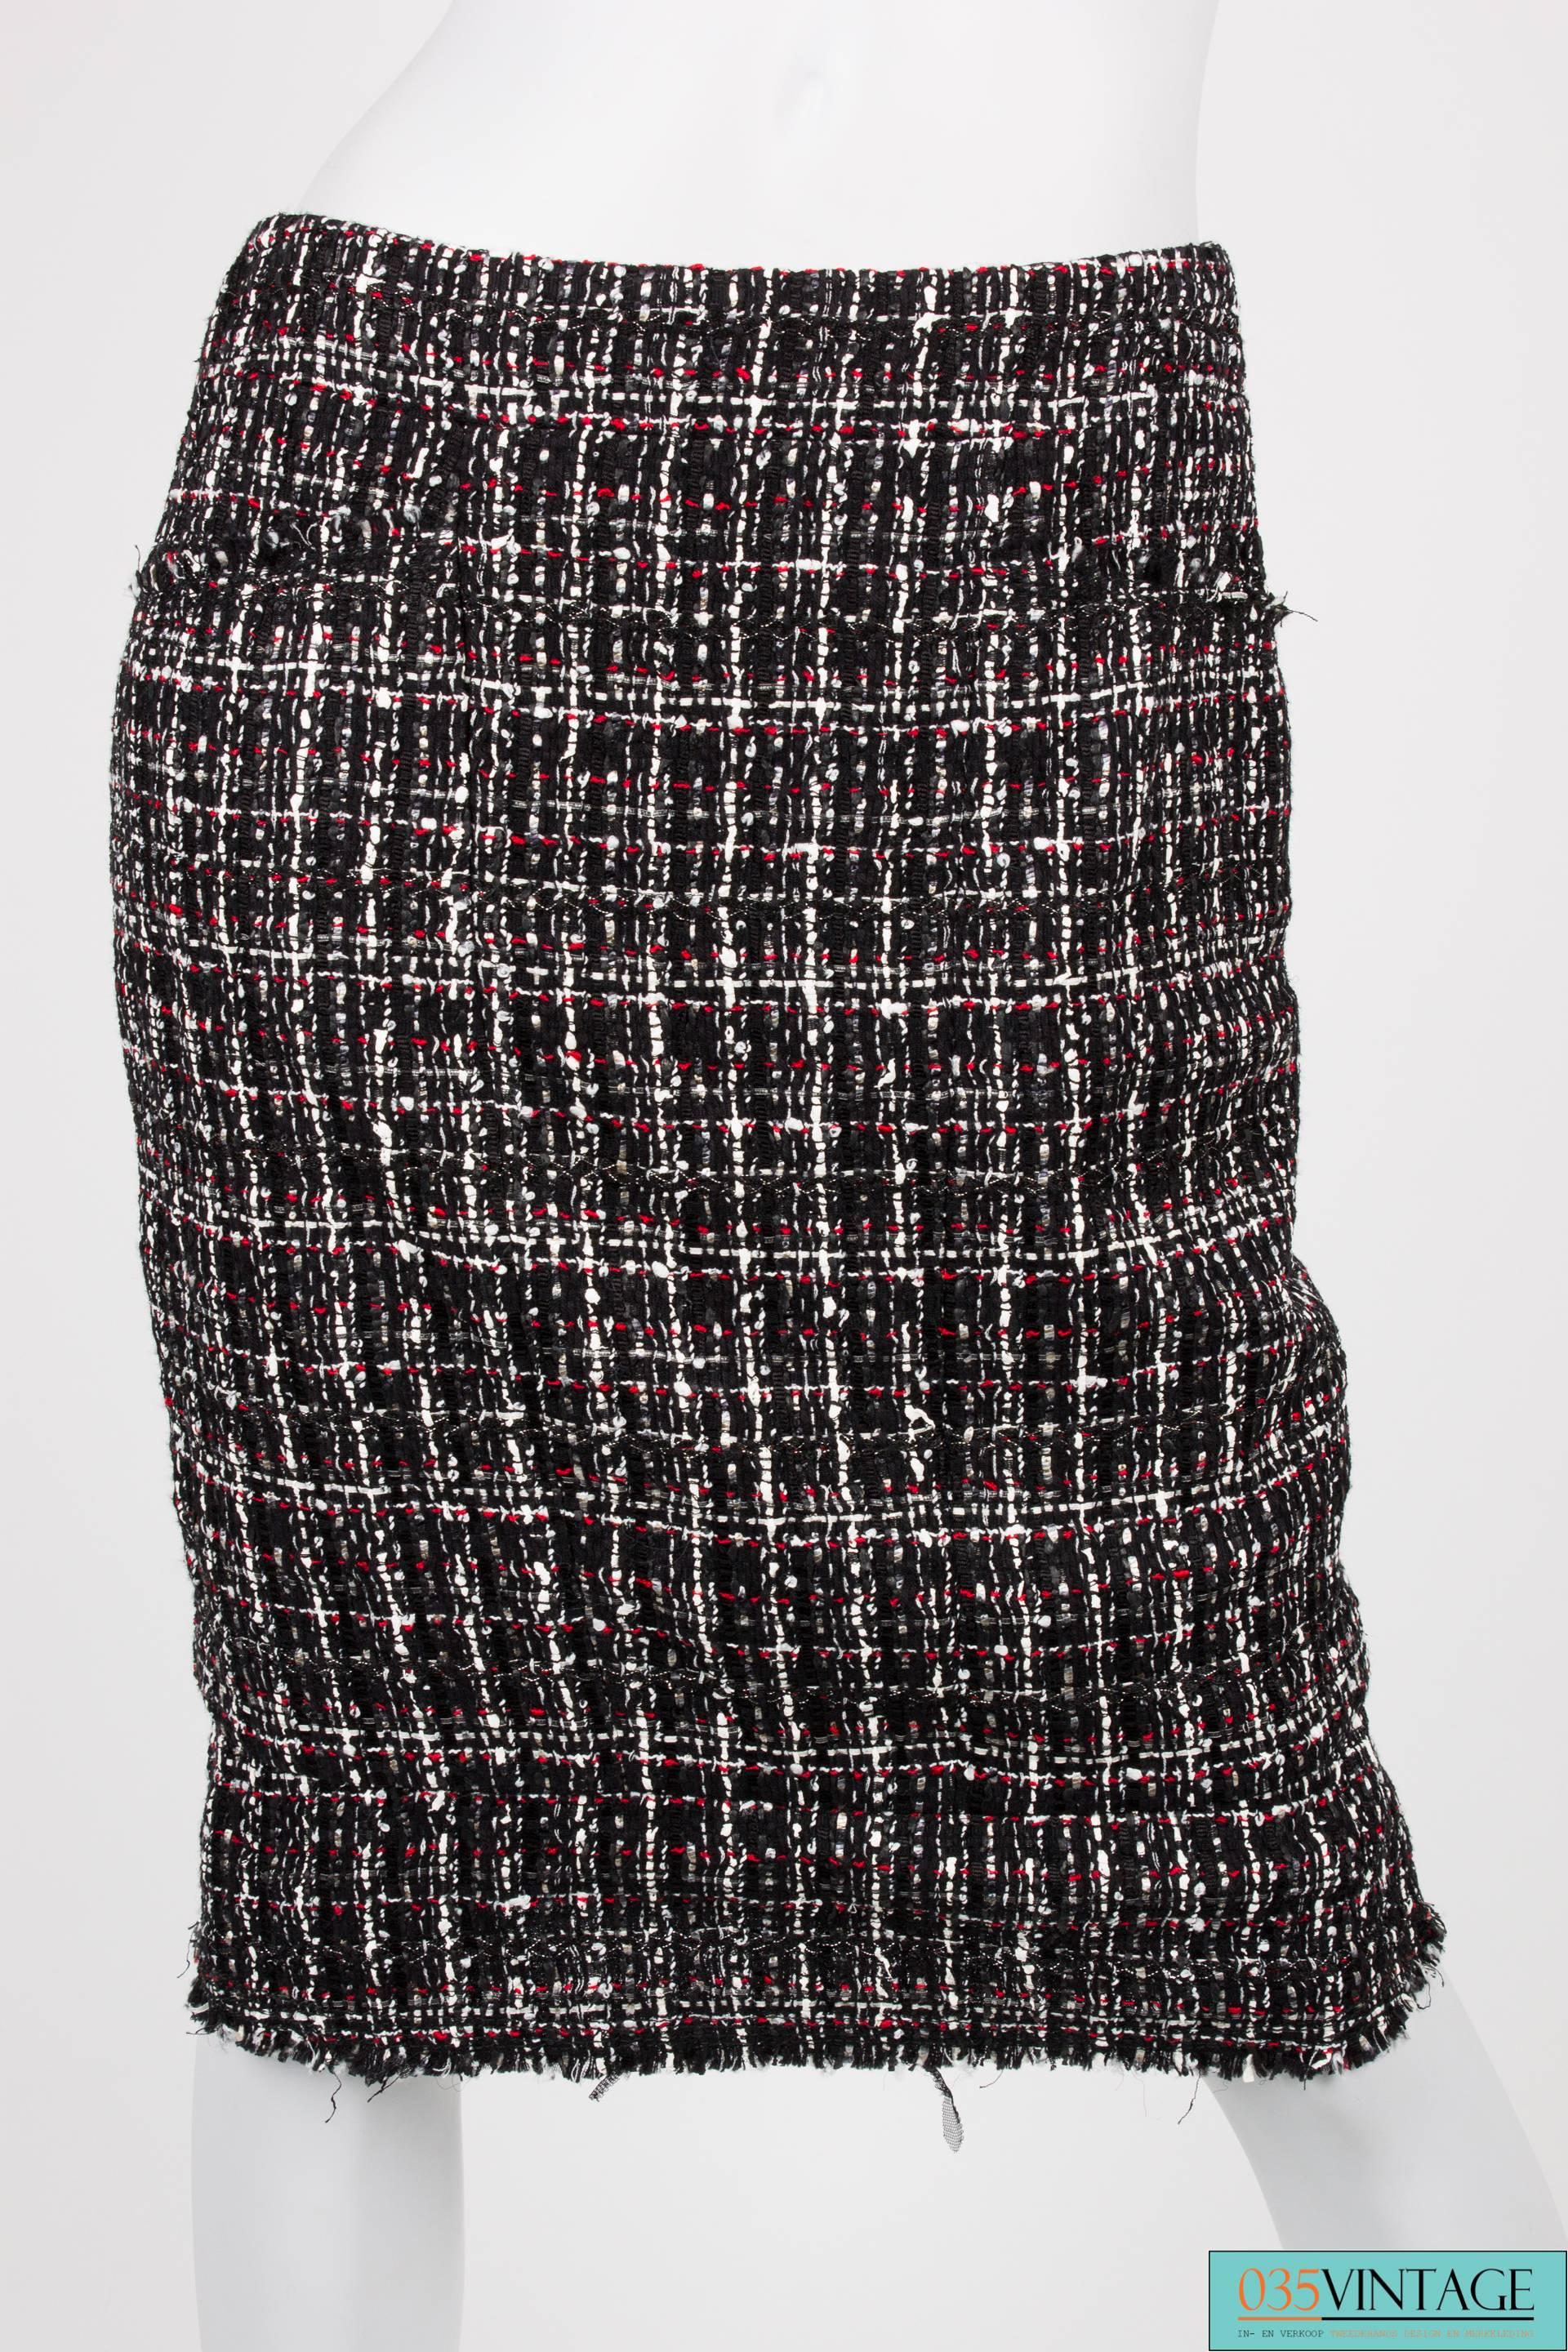 Chanel Suit 3-pcs Jacket, Skirt & Tie - black/white/grey/red In New Condition For Sale In Baarn, NL